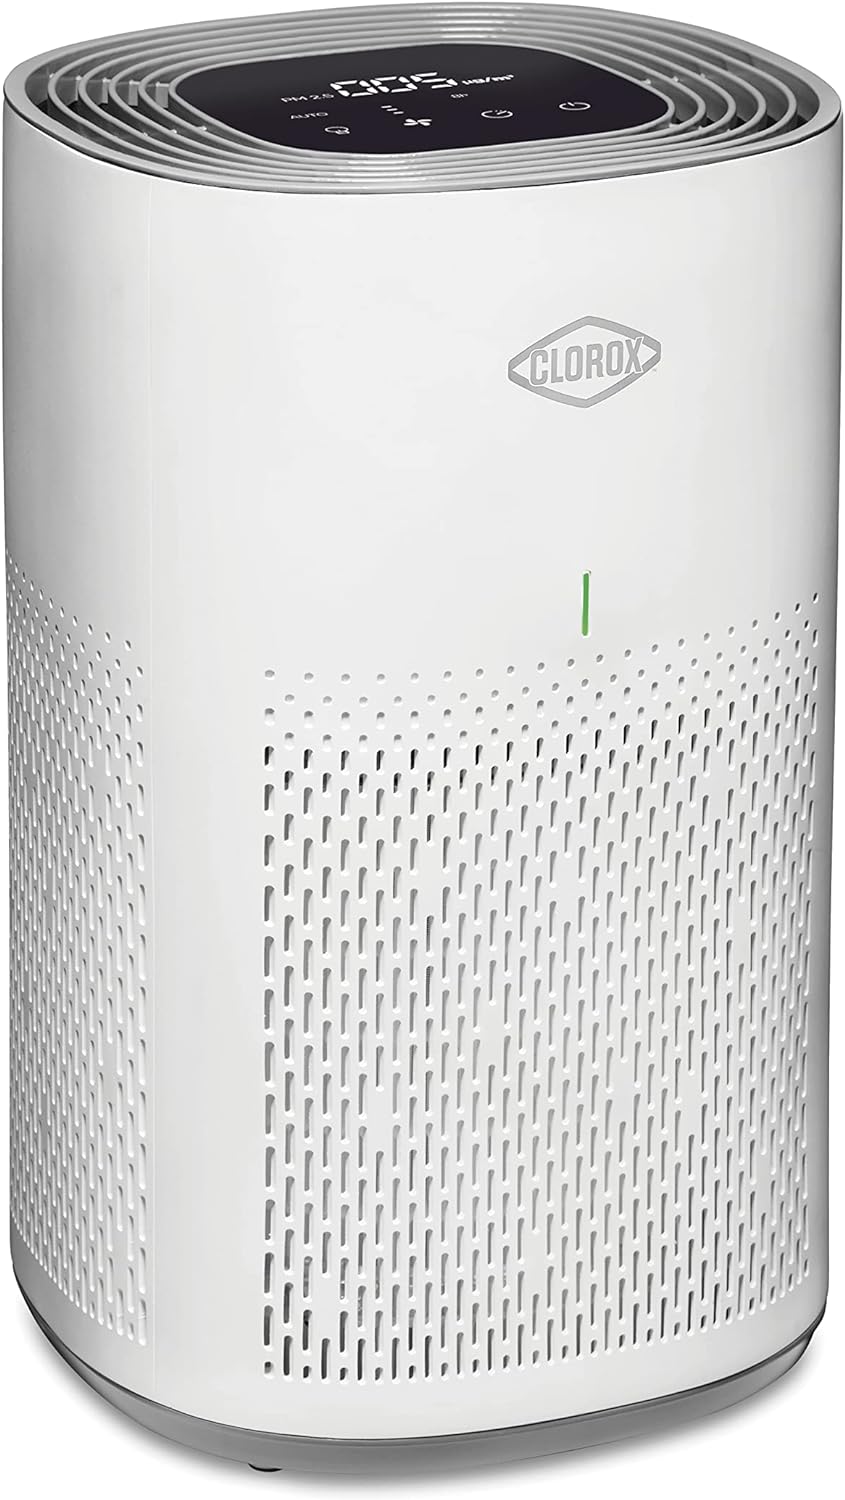 Best Air Purifier for 1000 Sq. Ft.